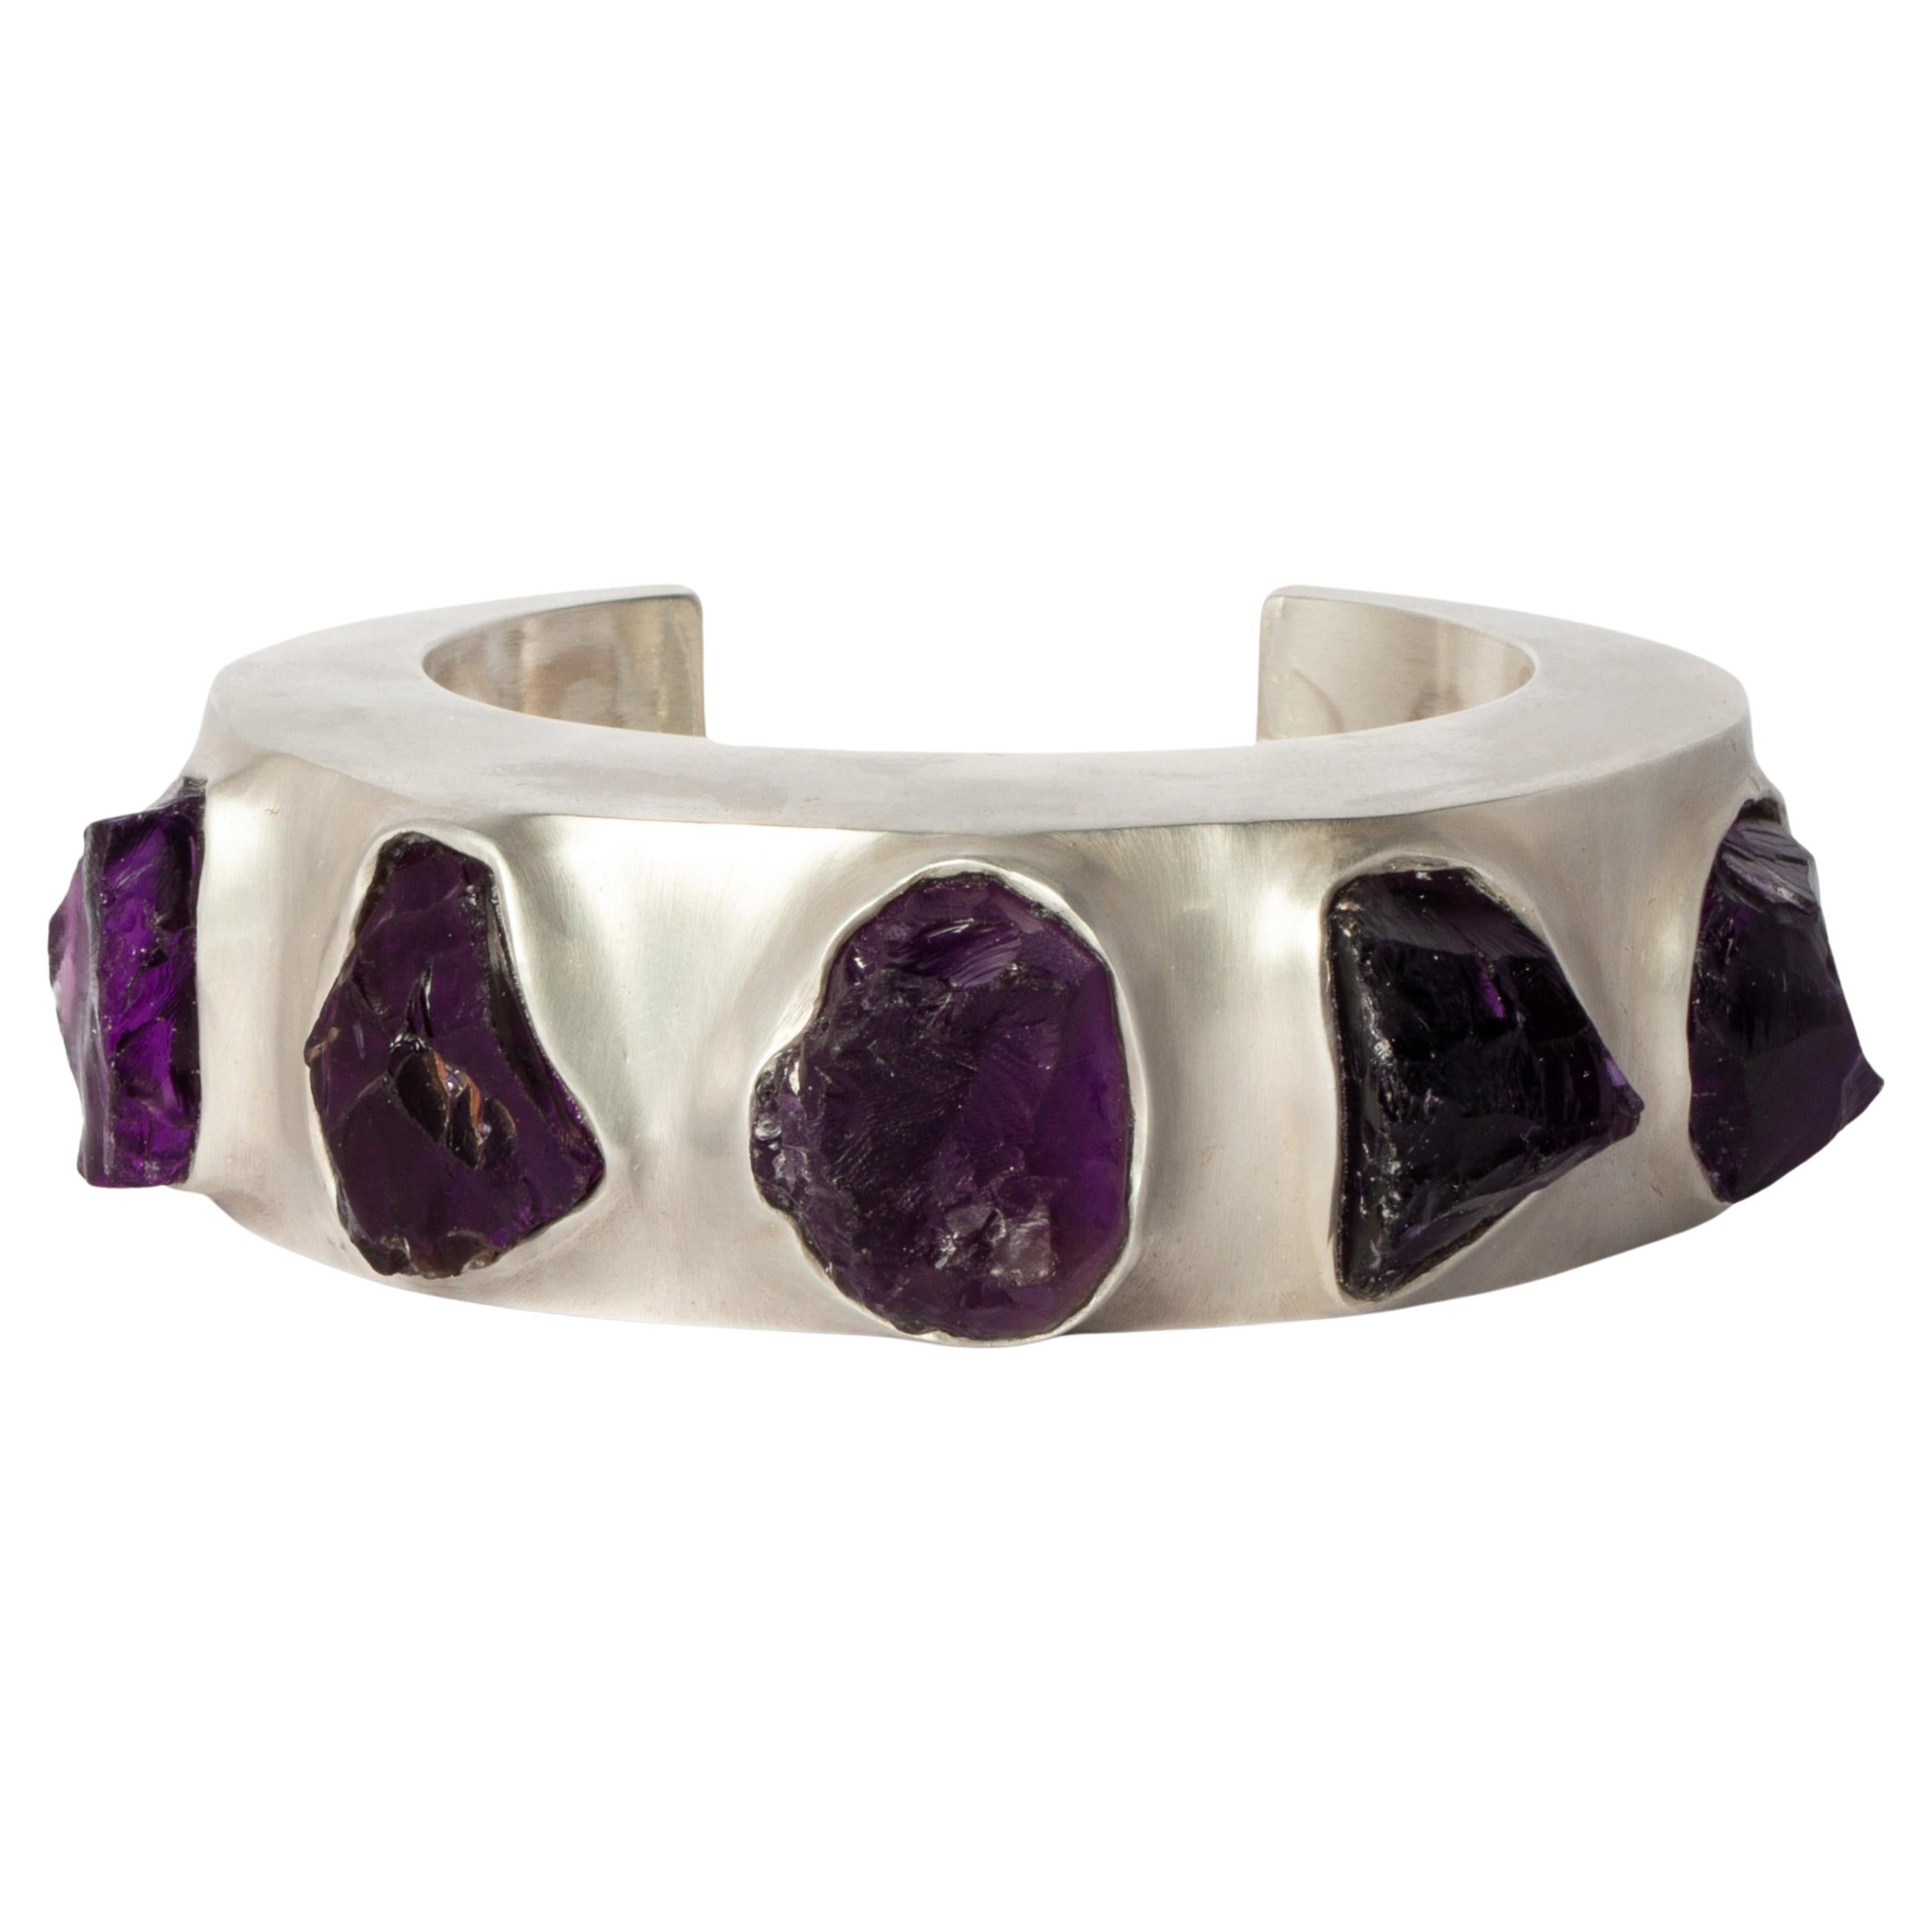 Crescent Armband (Terrestrial Surfaced, Amethyst, 30 mm, AS+MA+AME) im Angebot